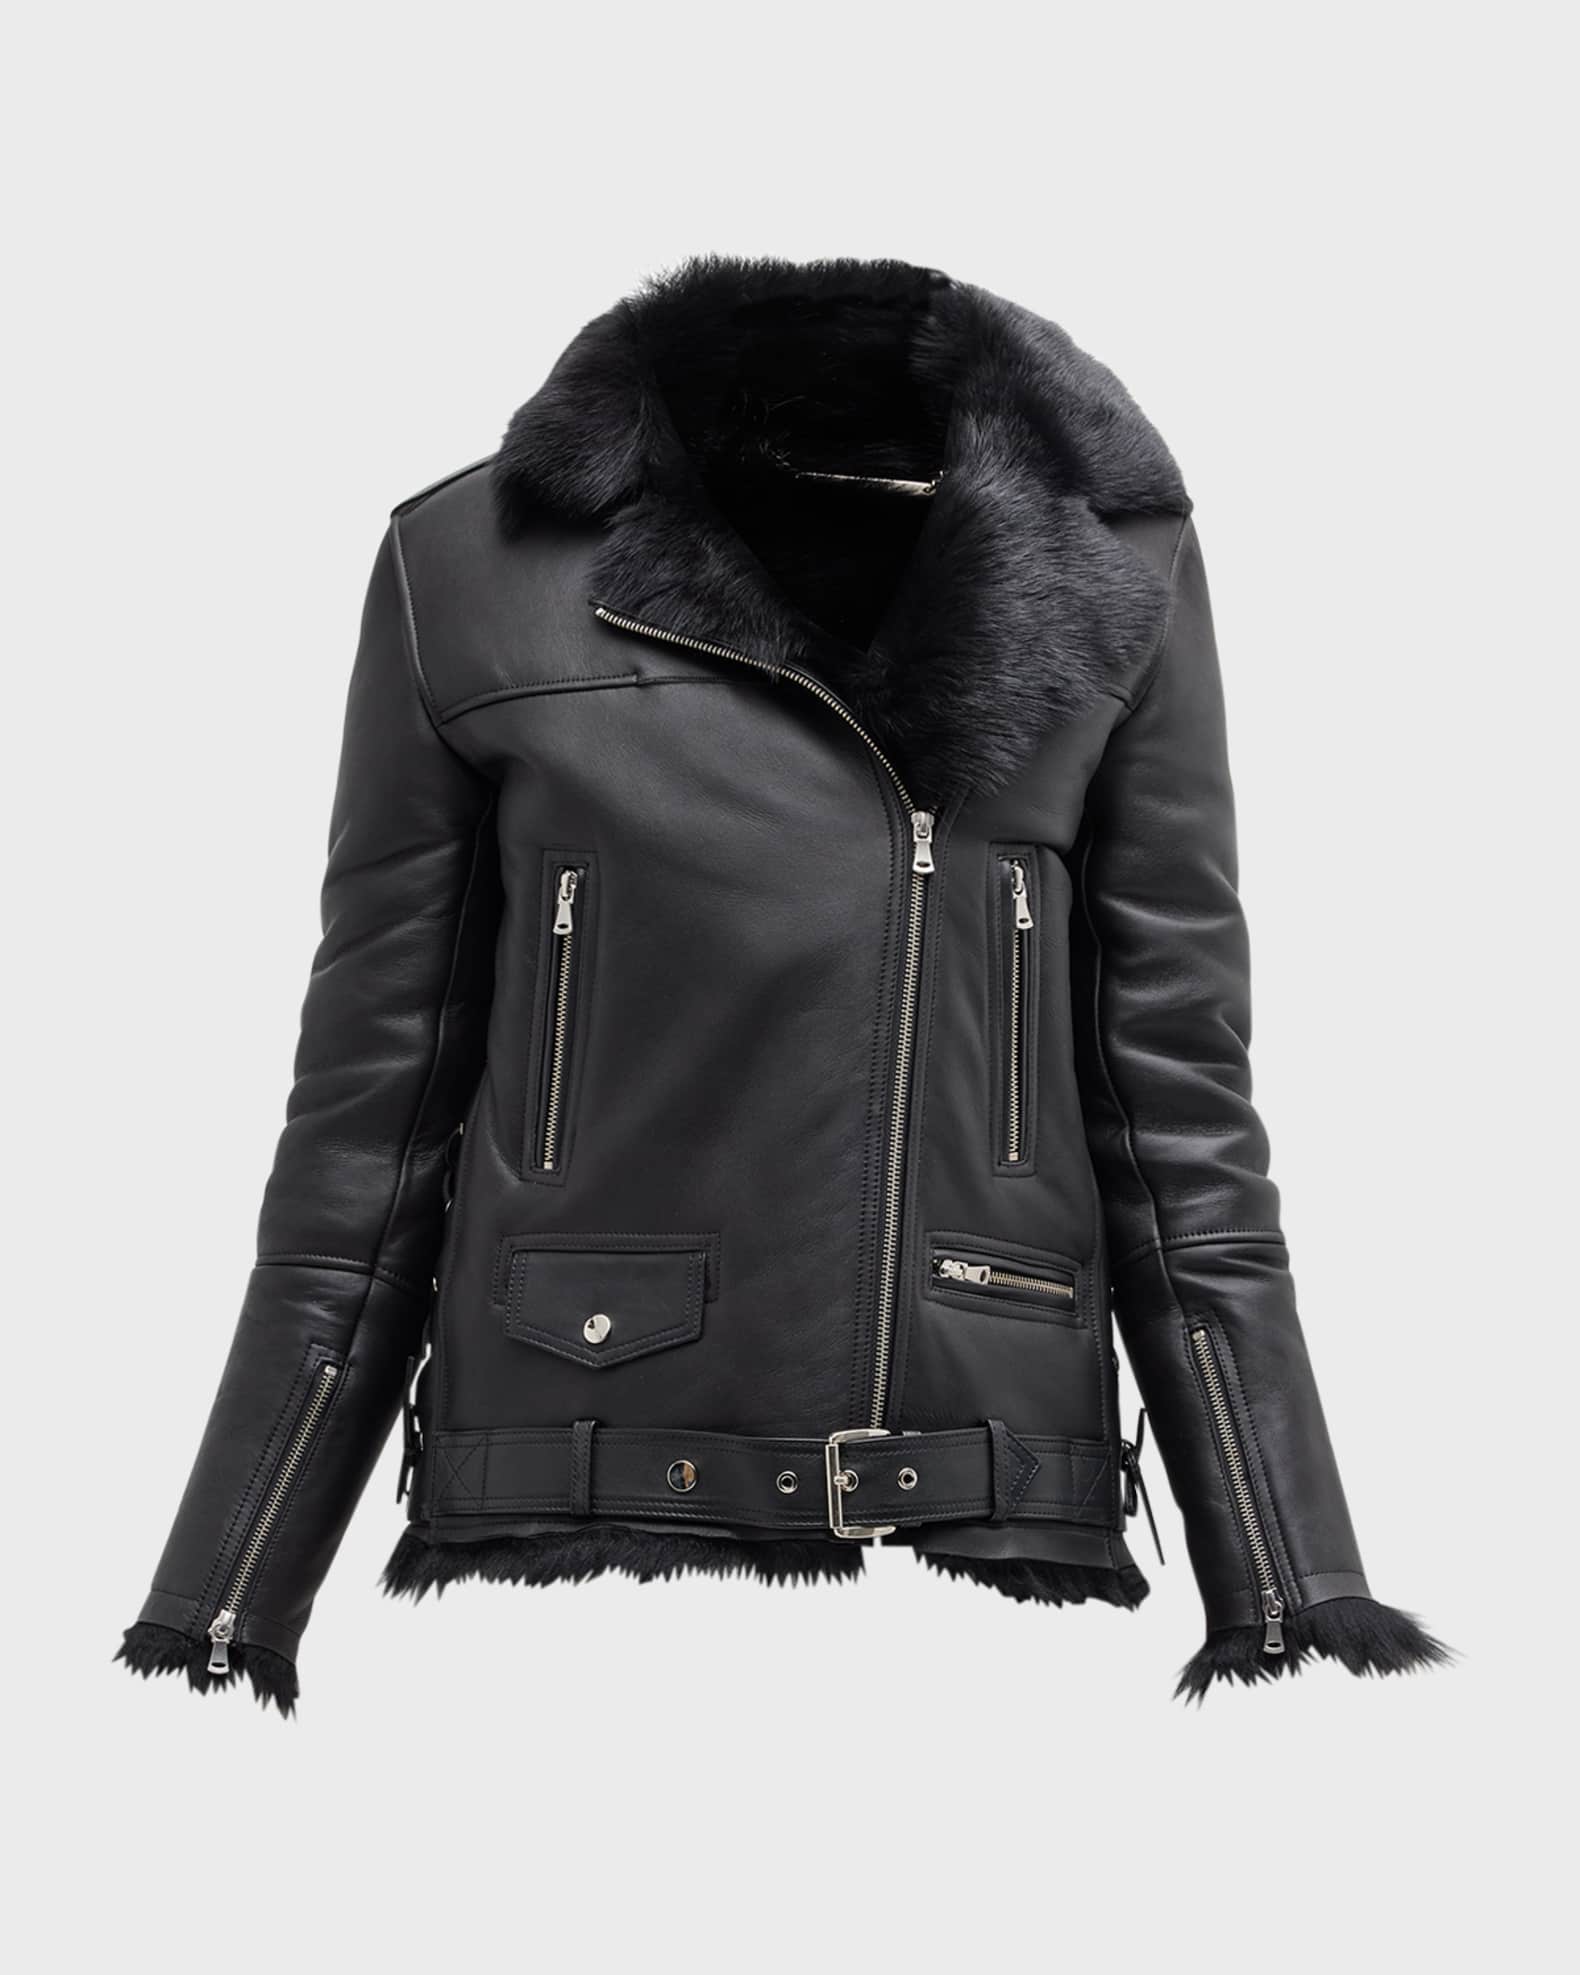 Nour Hammour Leather Motorcycle Jacket w/ Shearling Lining | Neiman Marcus